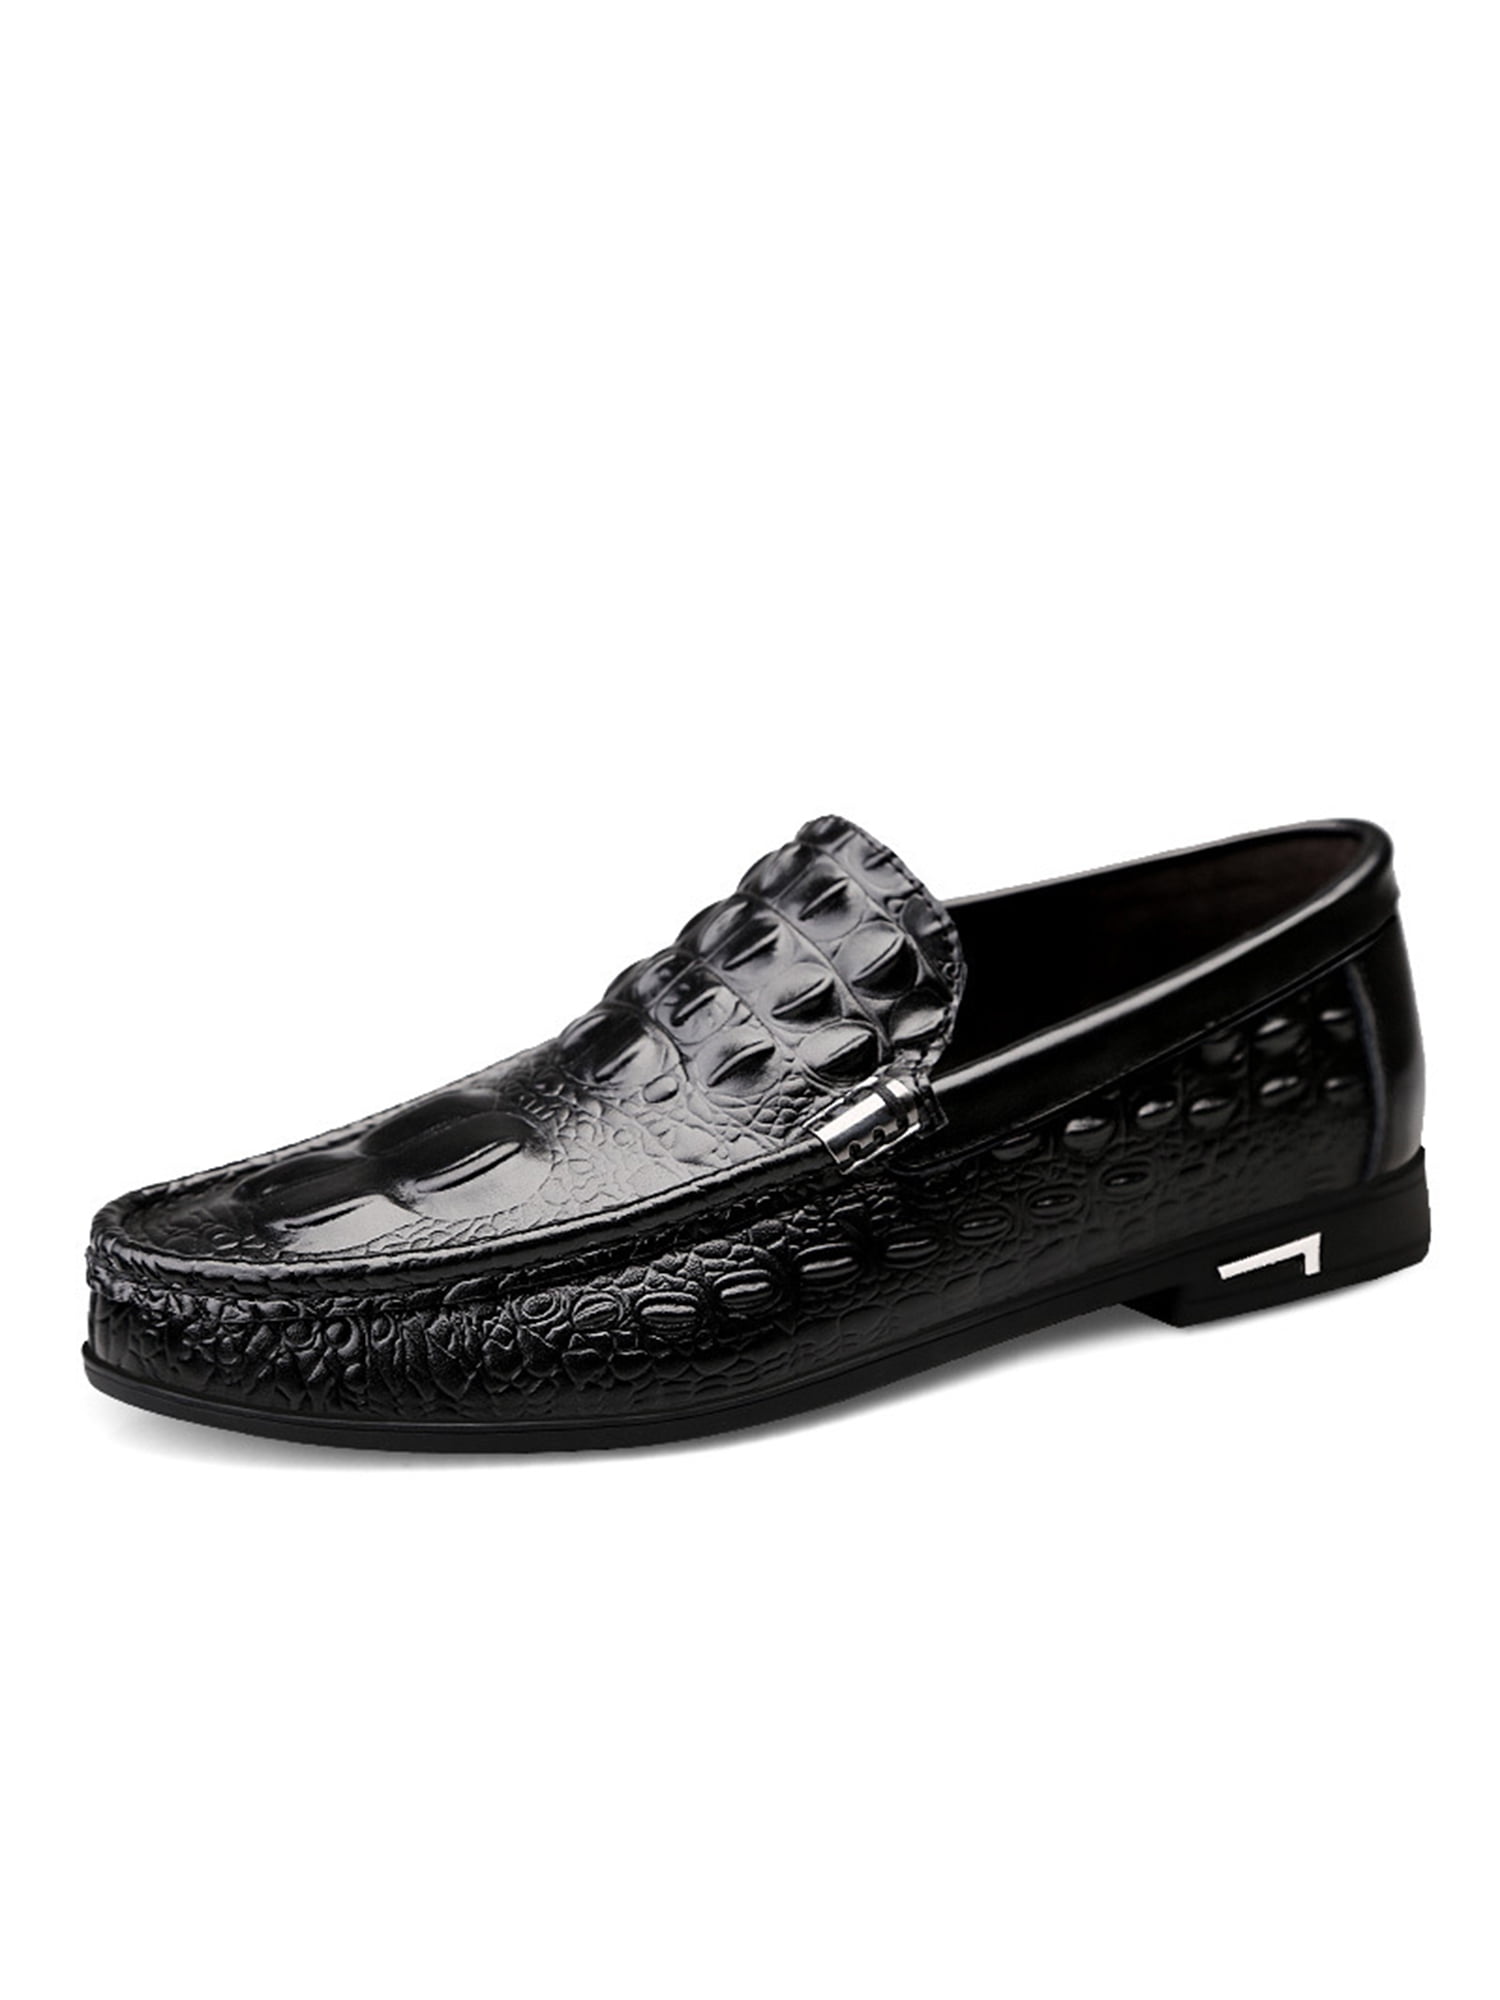 Men Comfort Shoes Dress Formal Business Slip On Loafers Casual Driving Moccasins